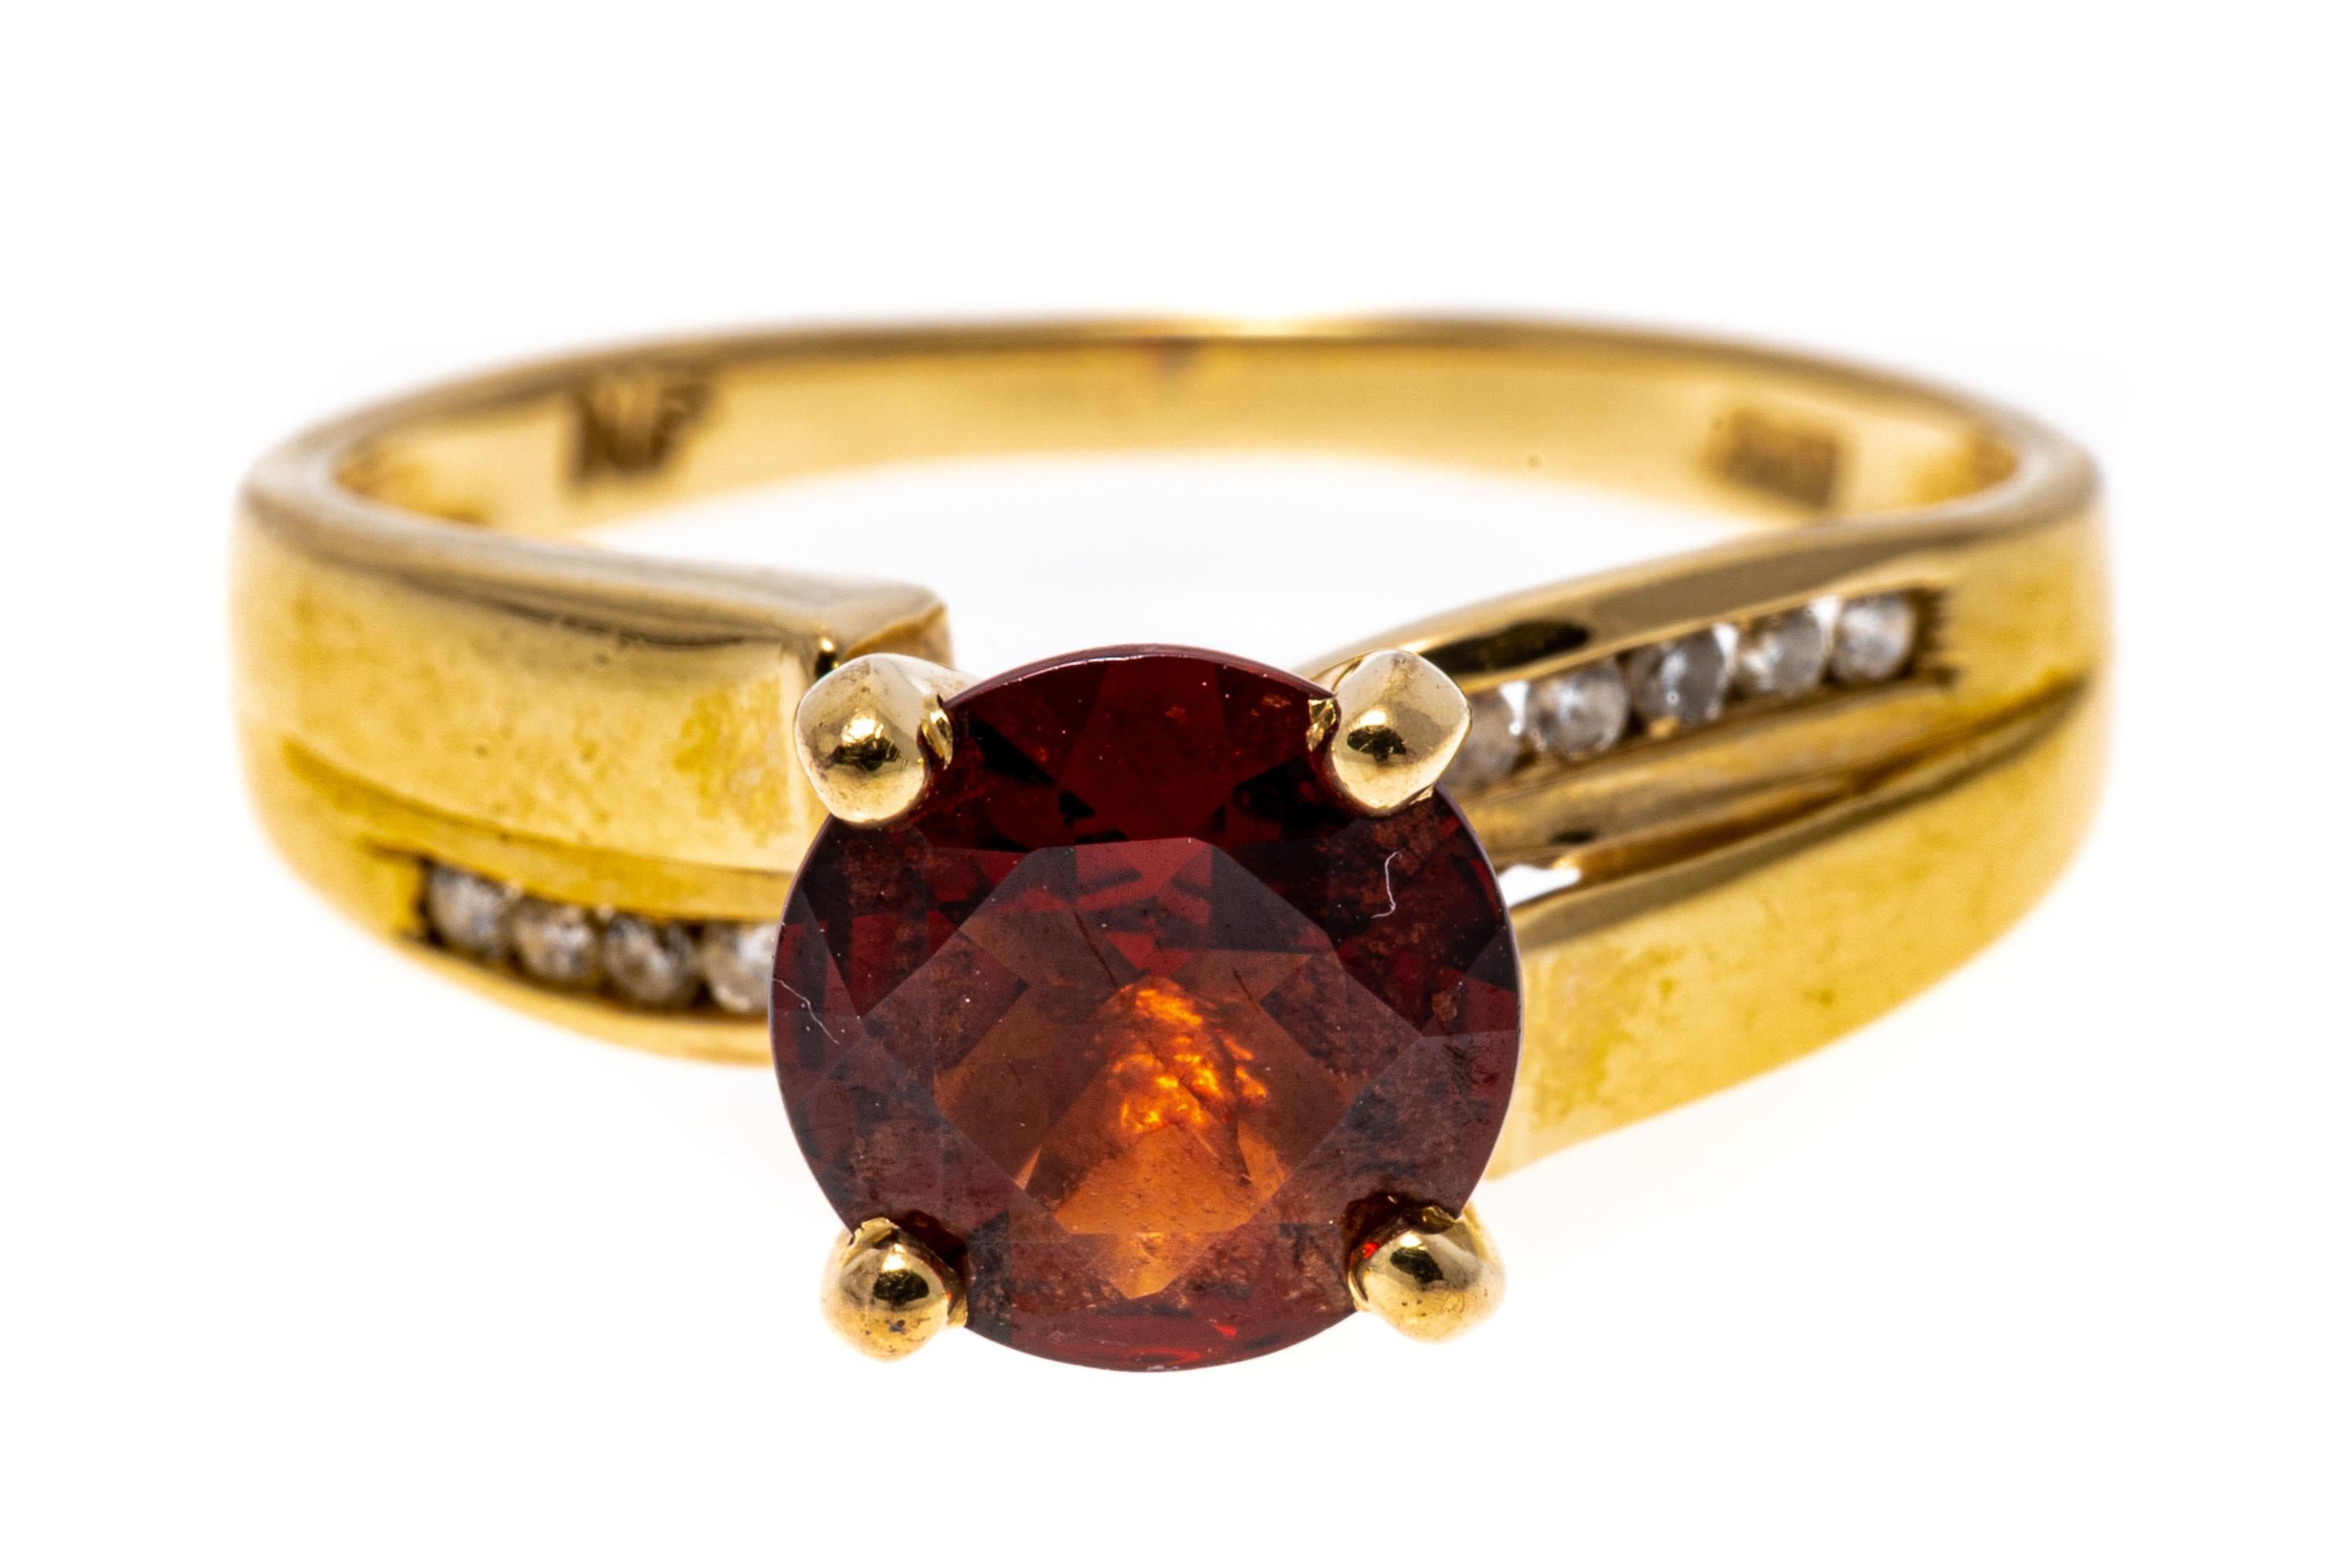 14k yellow gold ring. 14k yellow gold handsome round faceted burgundy color garnet, approximately 0.86 CTS, prong set and decorated with offset, channel set round faceted diamond sides, approximately 0.05 TCW.
Marks: 14k
Dimensions: 5/8